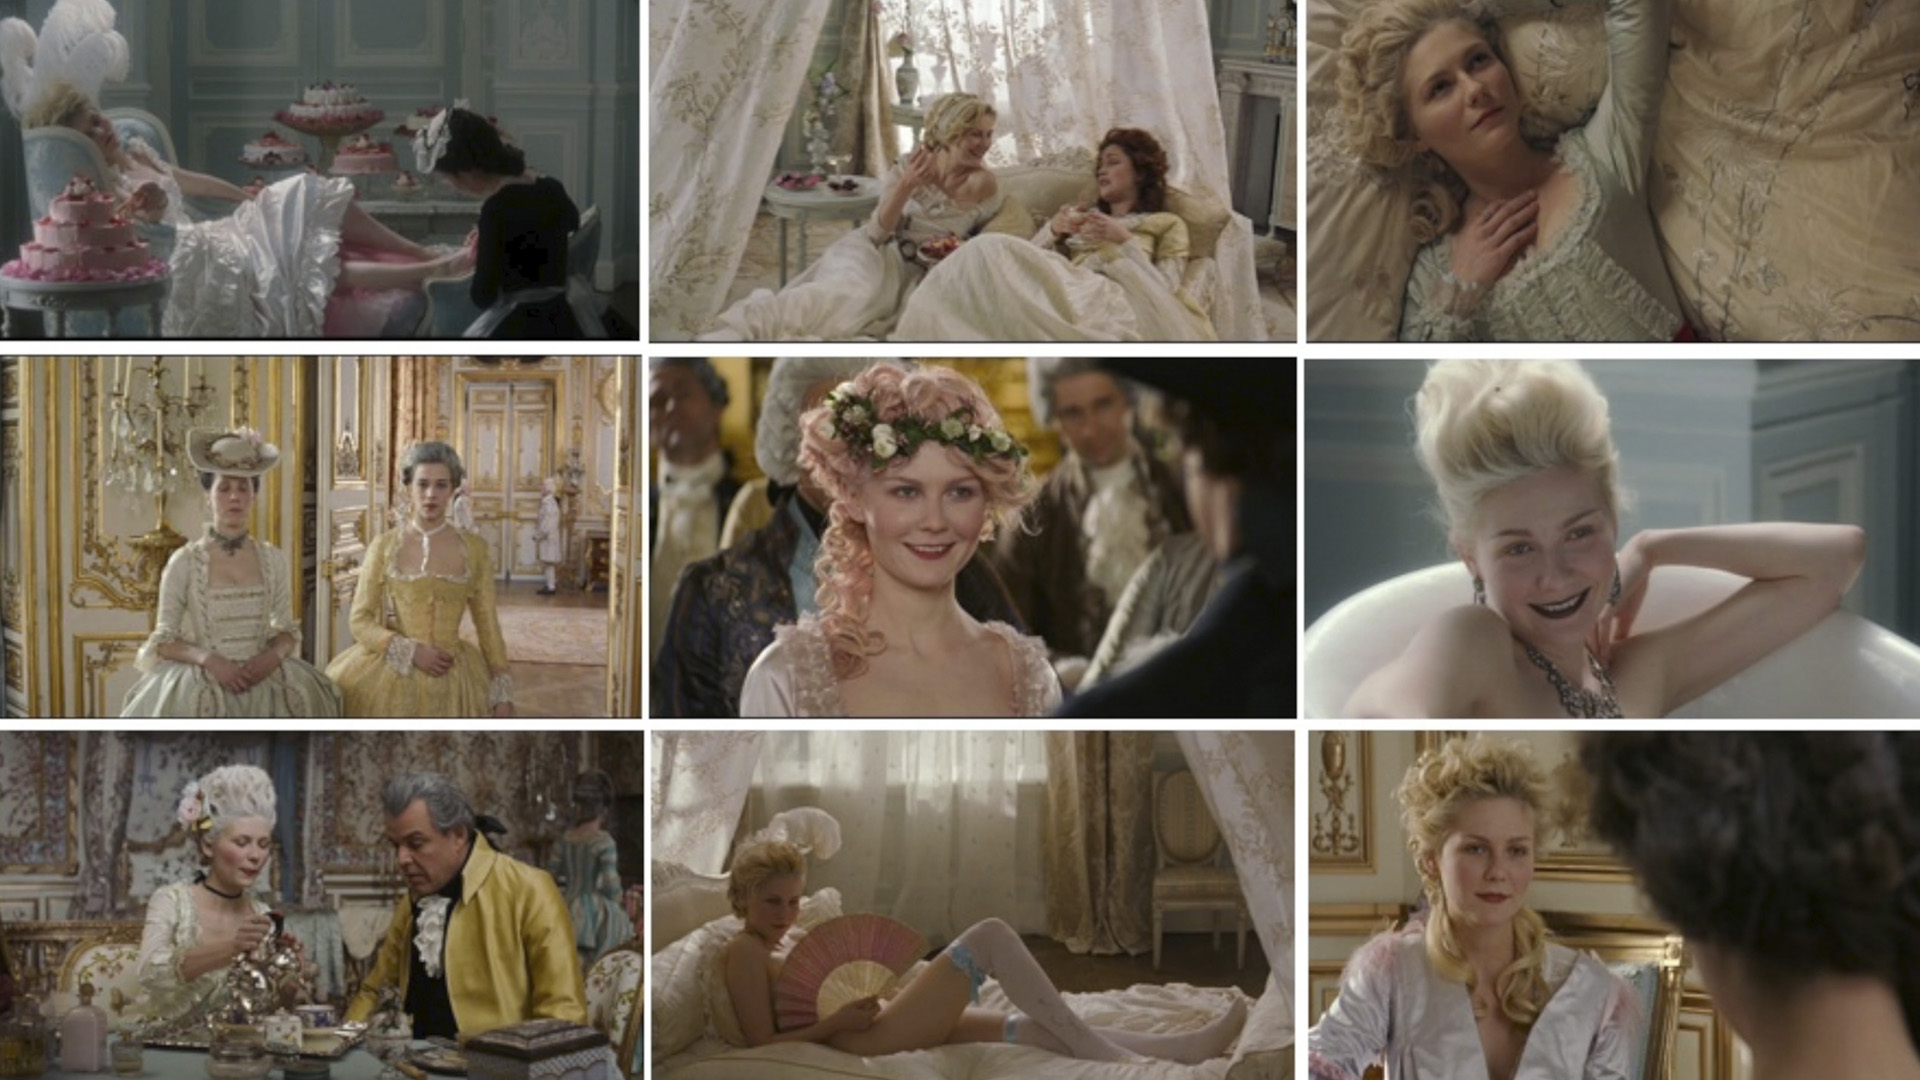 A collage from different film stills from the film "Marie Antoinette" used as a showcase for an outstanding mise en scene